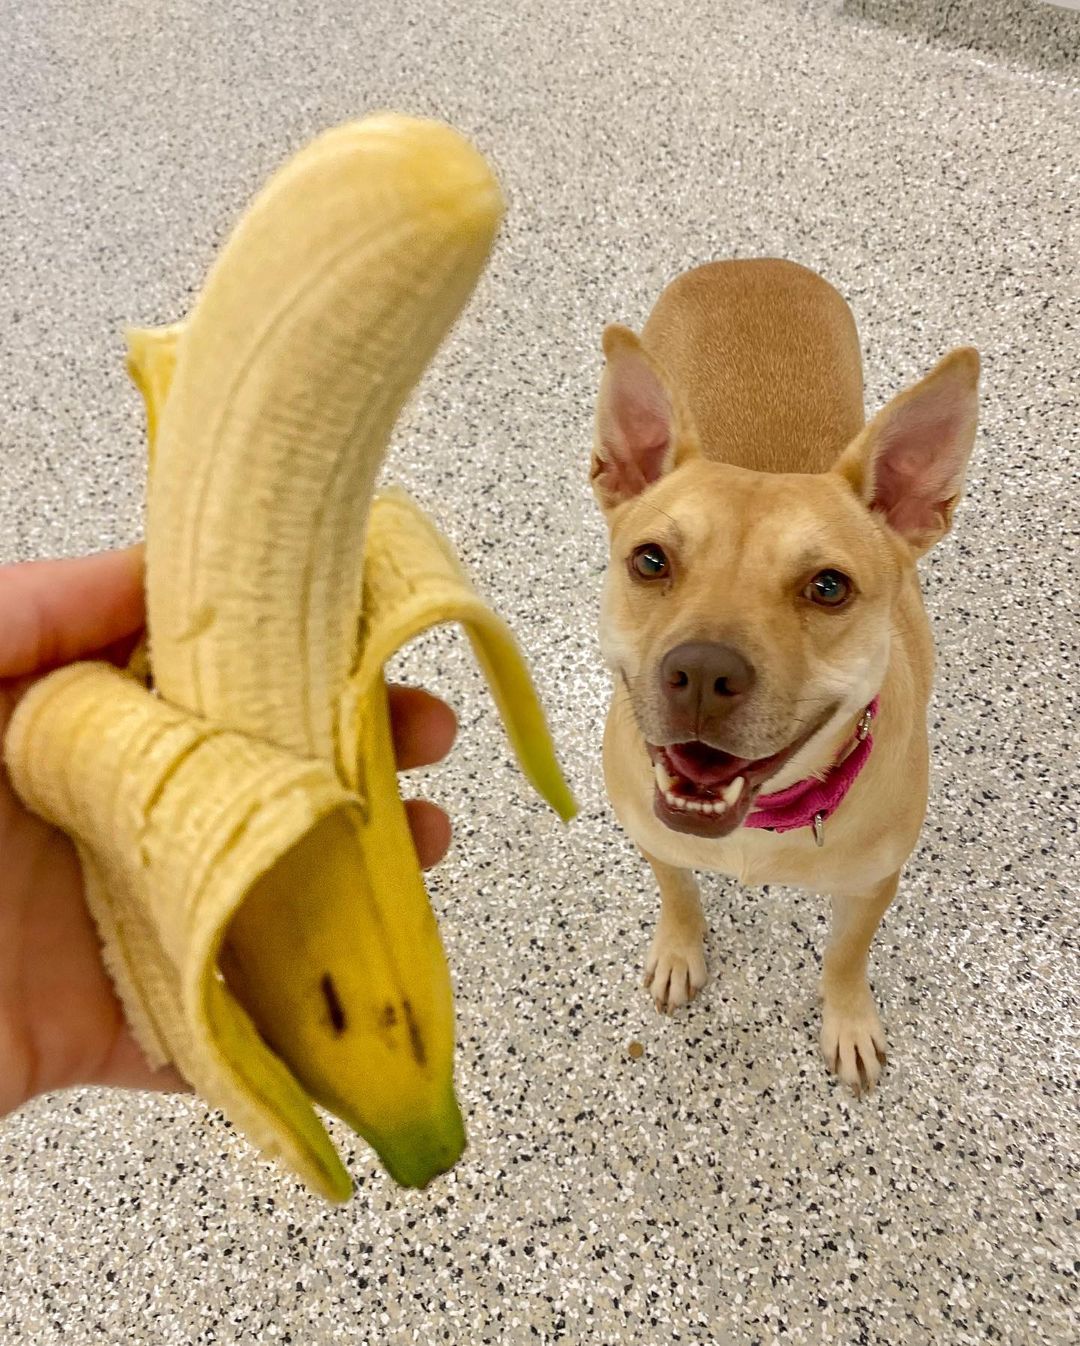 (Banana for scale) Adopt your very own Petite Pocket Pittie! Okay, maybe she’s not THAT small, but at 35 pounds, Miss Evie is at a lovely 